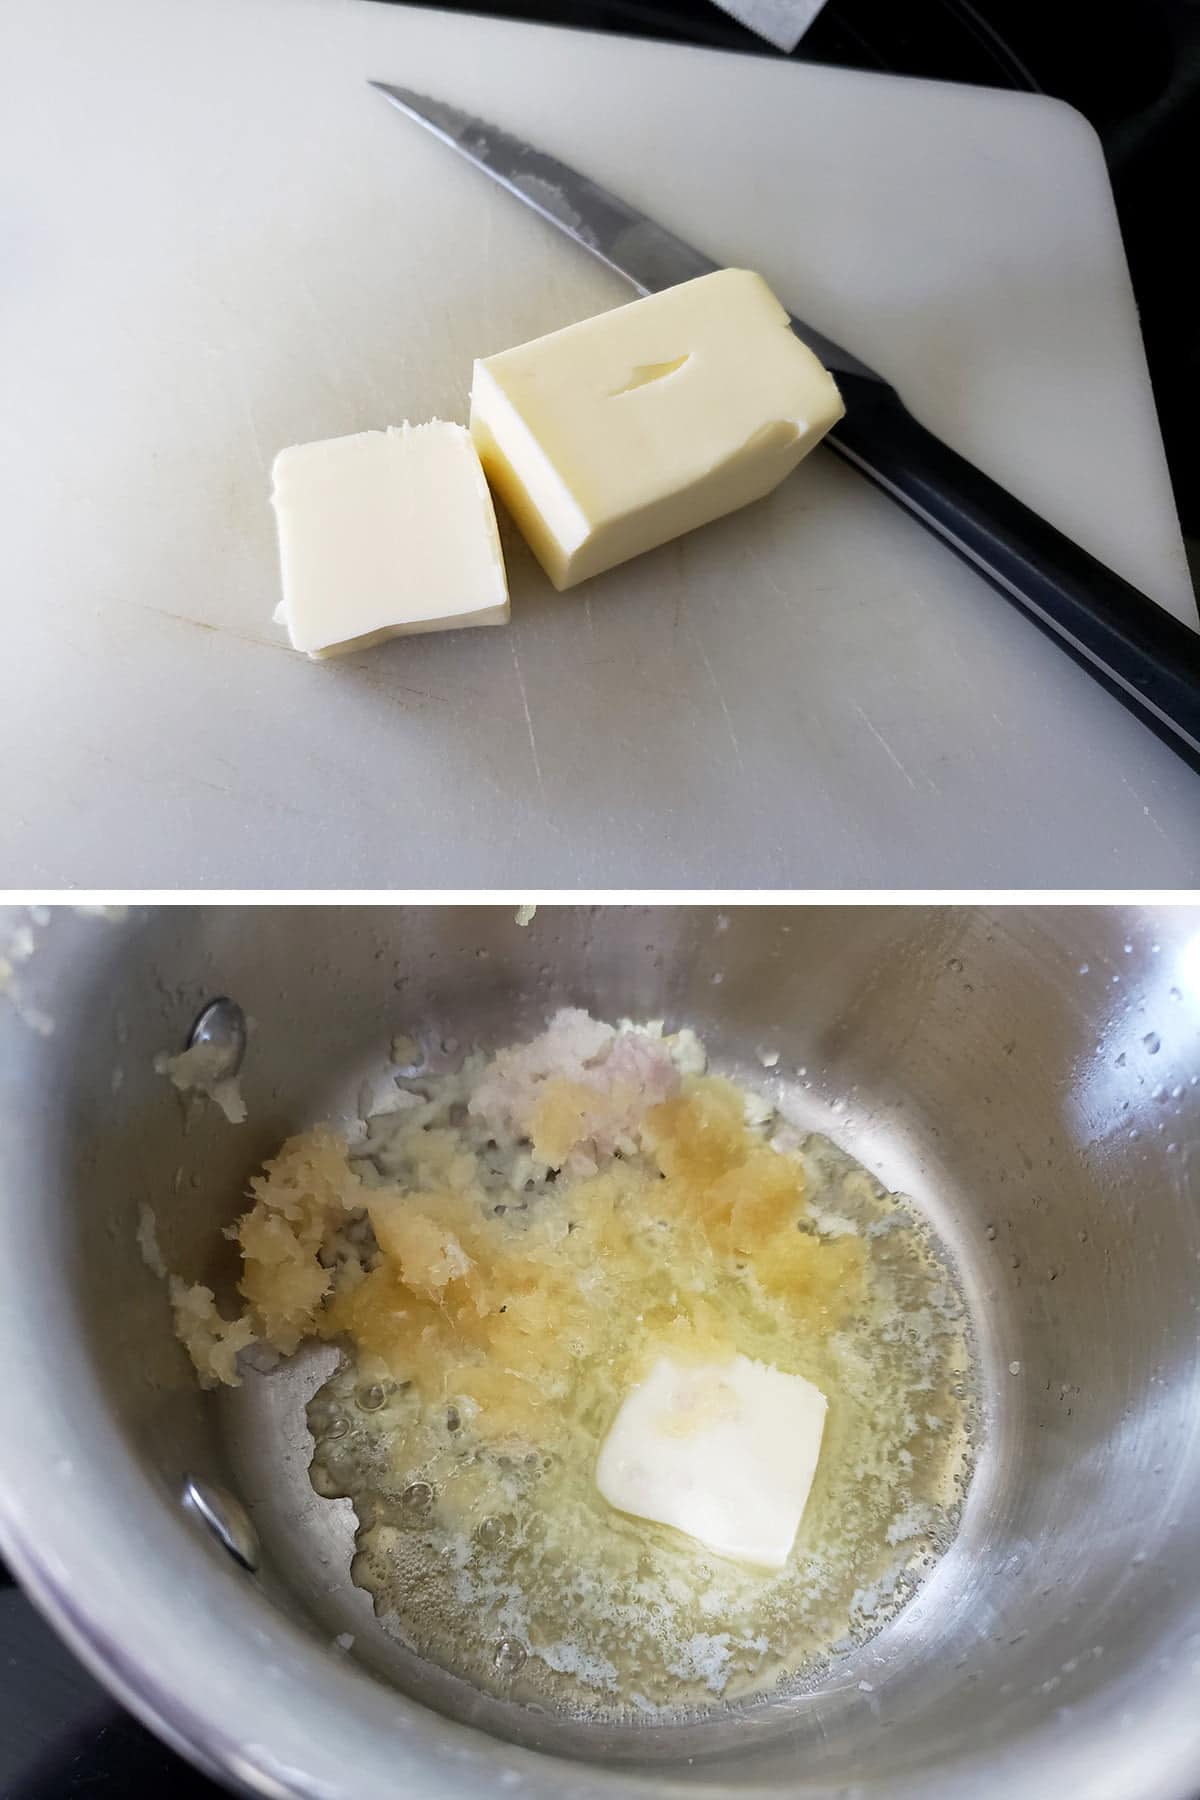 A two part image showing a piece of butter being cut off a block, and butter, shallots, and garlic in a small saucepan.